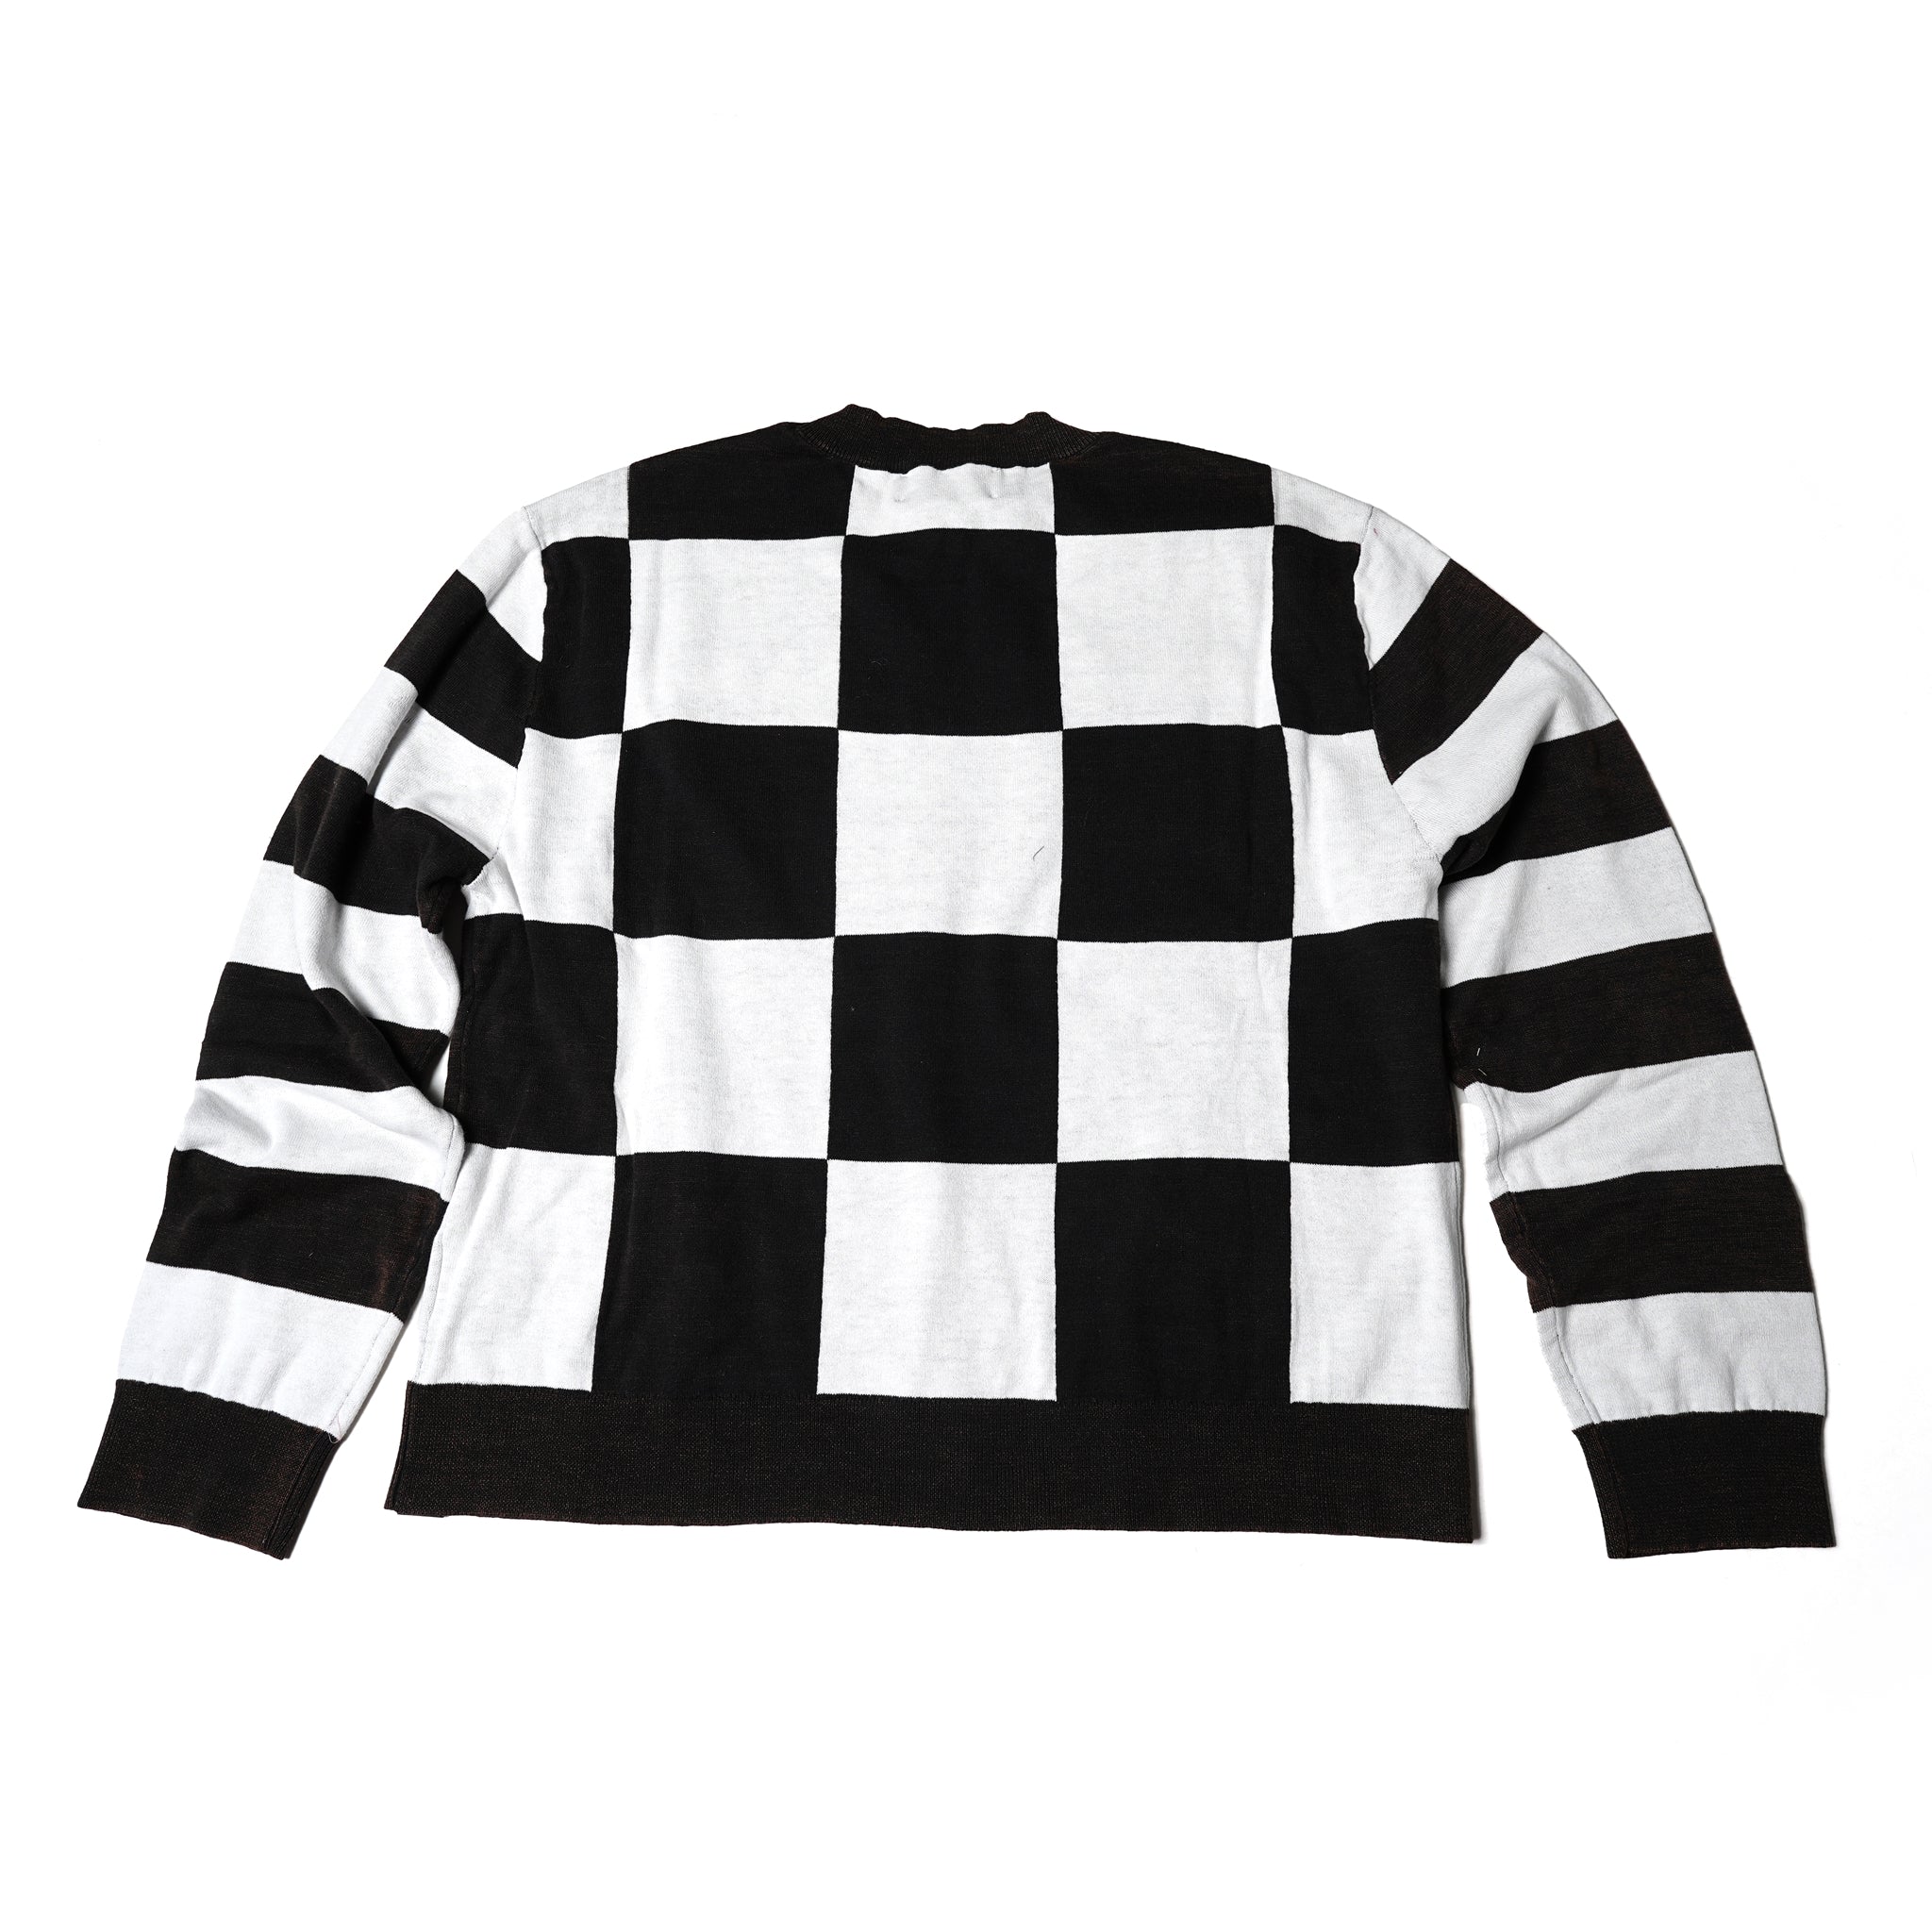 No:25576 | Name:SCOREBOARD SMILEY KNIT SWEATER | Color:Black White【ONE TEASPOON_ワンティースプーン】